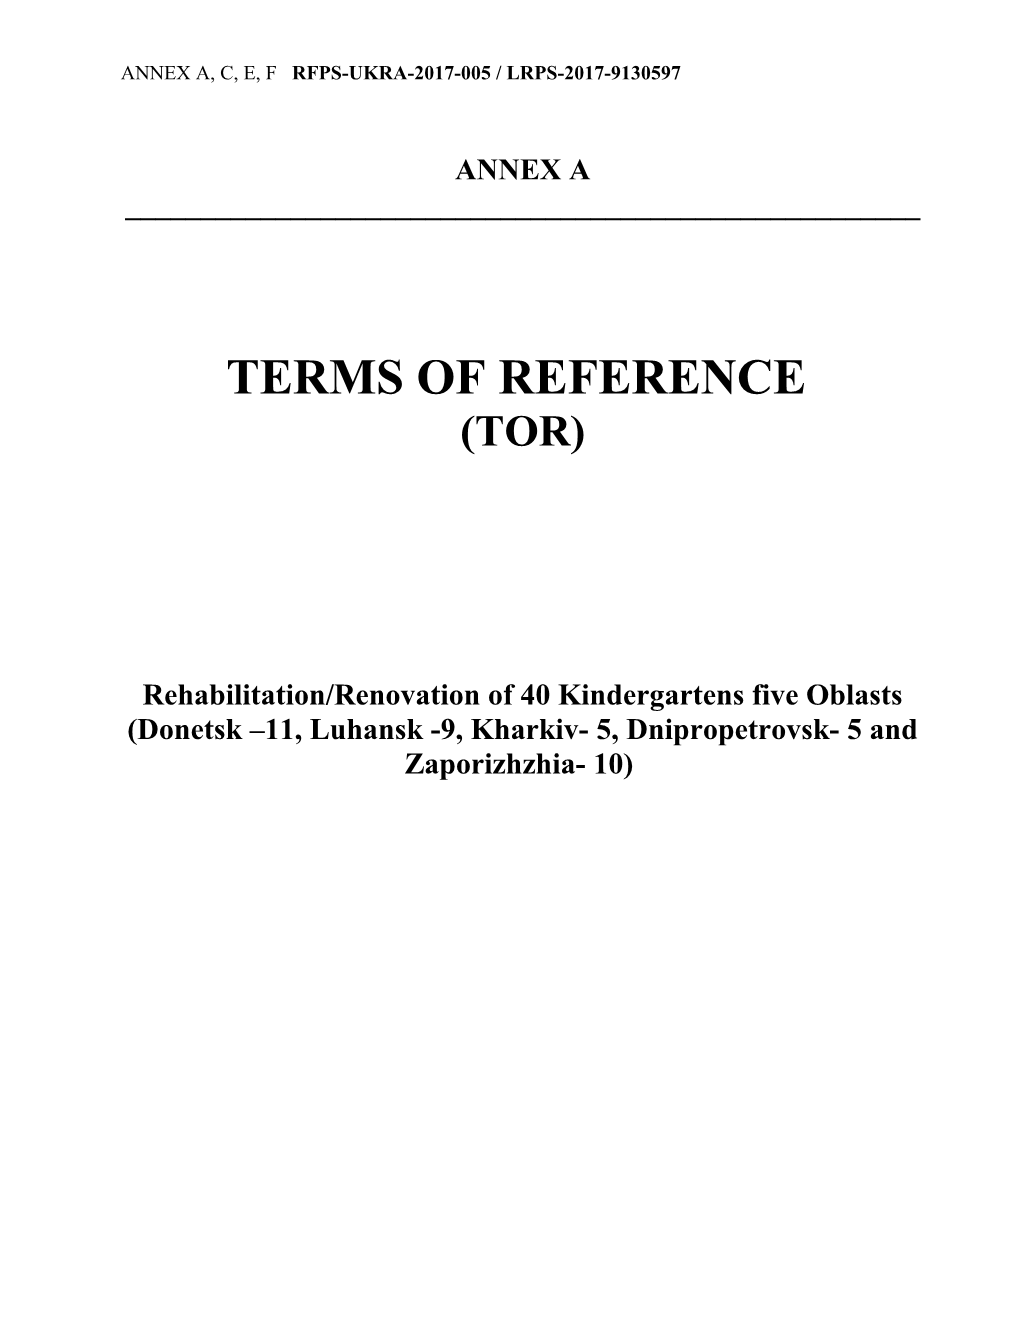 Terms of Reference s29